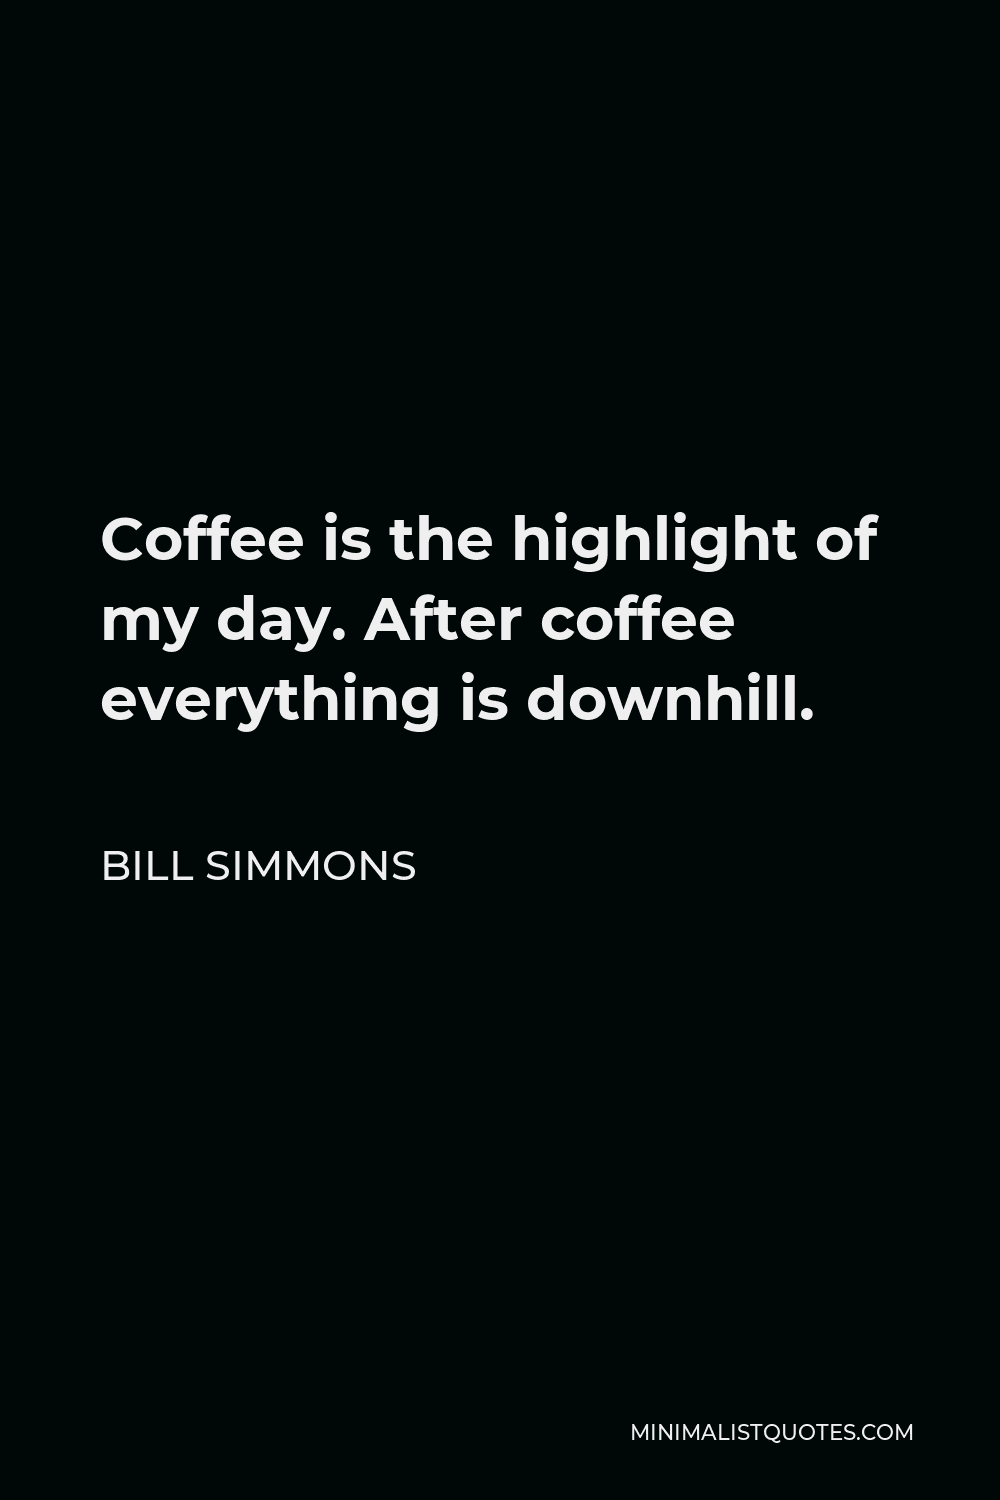 Bill Simmons Quote - Coffee is the highlight of my day. After coffee everything is downhill.